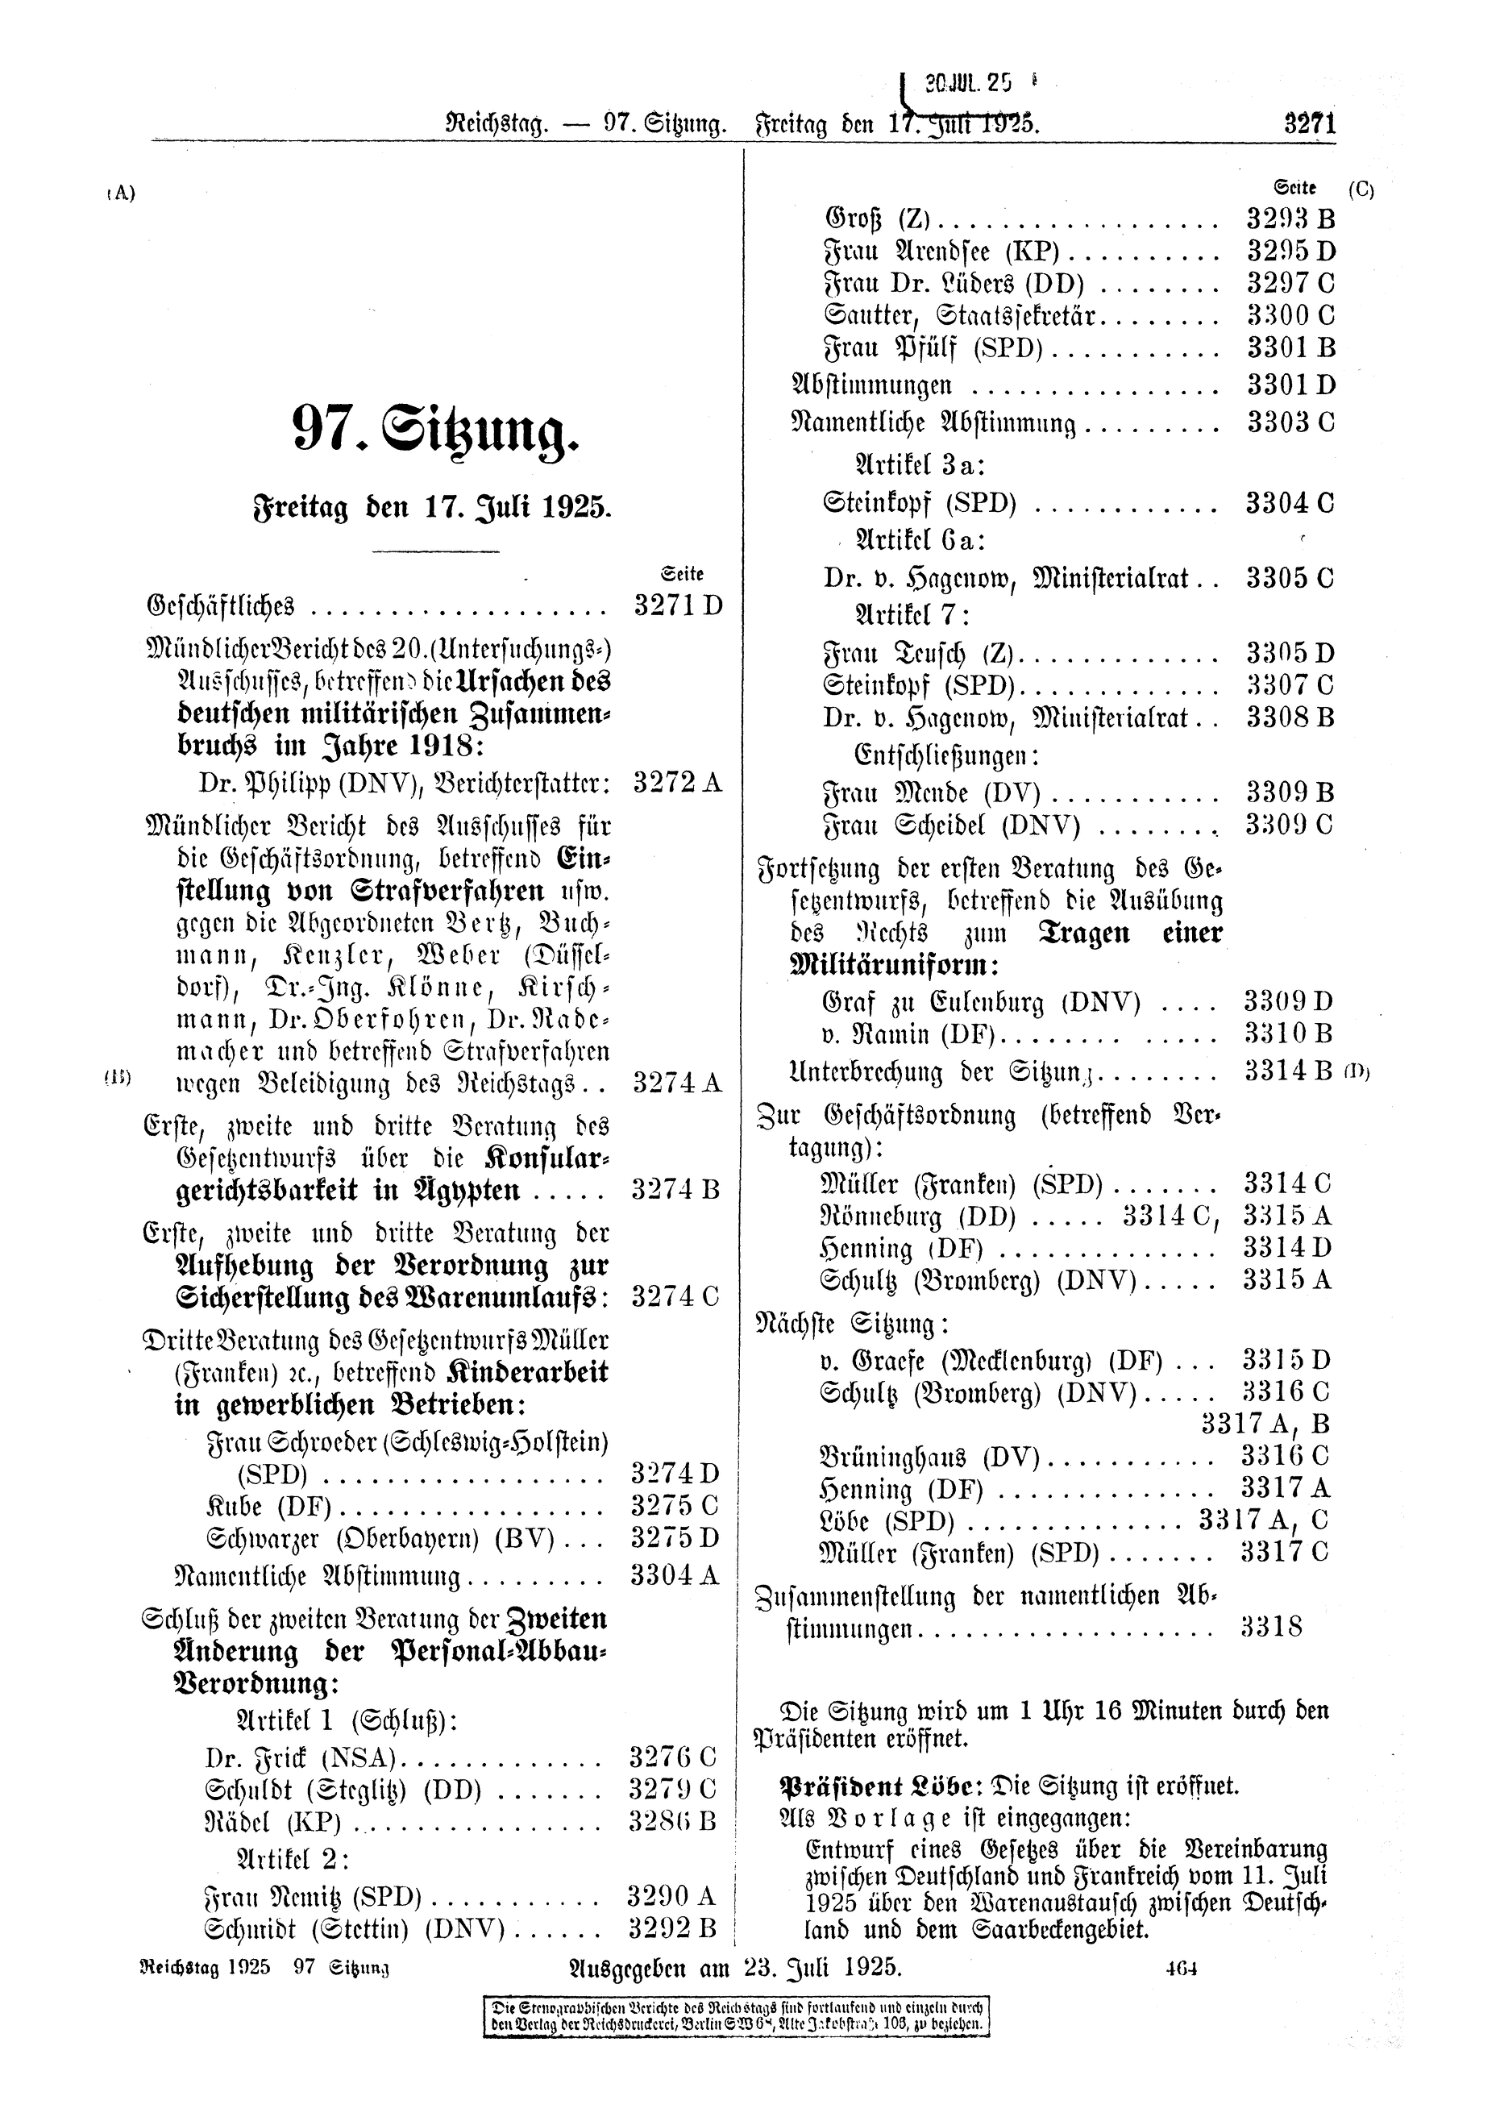 Scan of page 3271